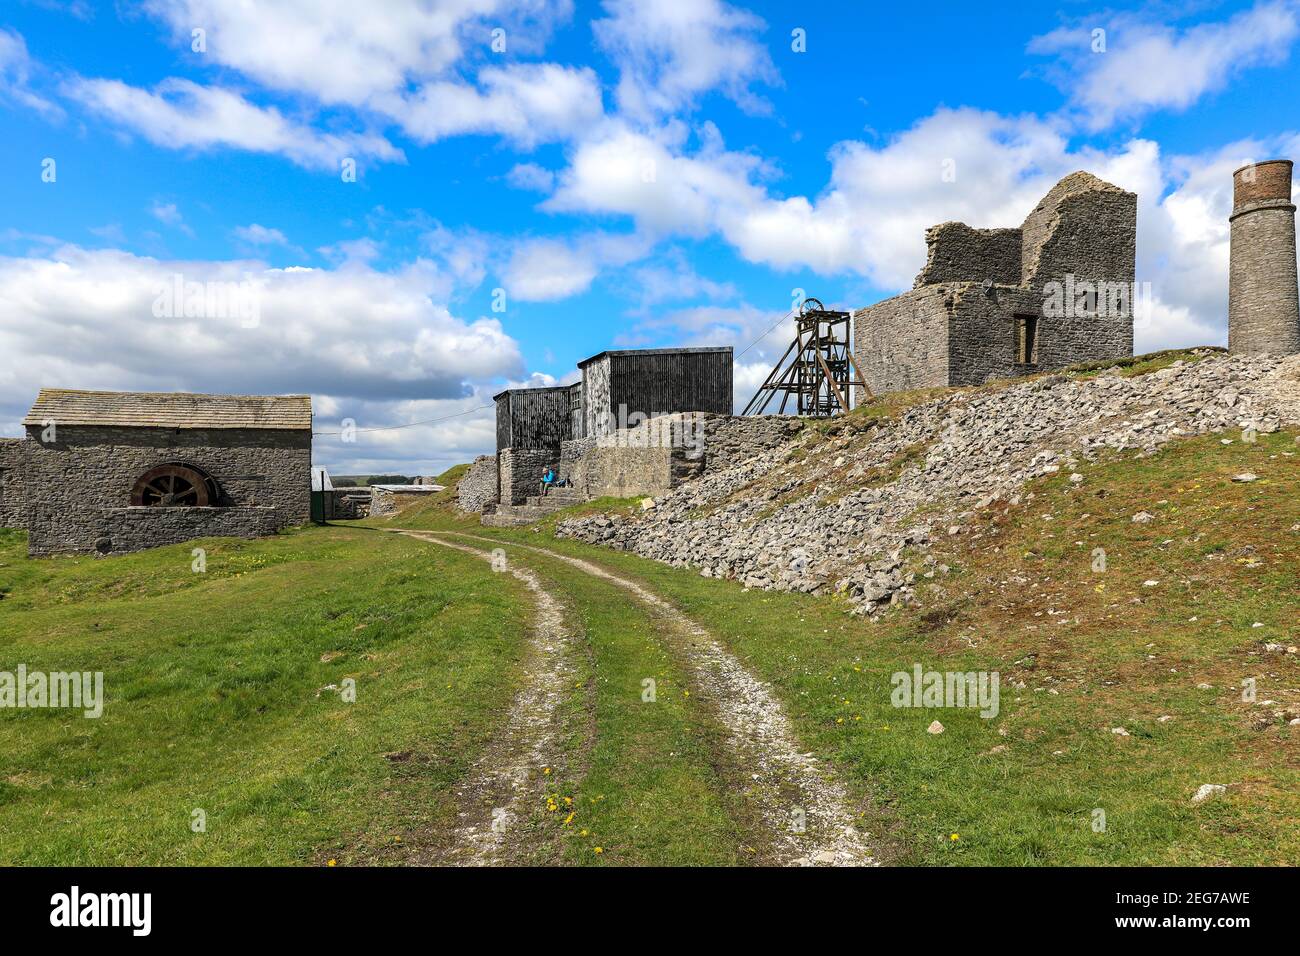 The Magpie Mine, a well-preserved disused lead mine, Sheldon, Derbyshire, England, UK Stock Photo